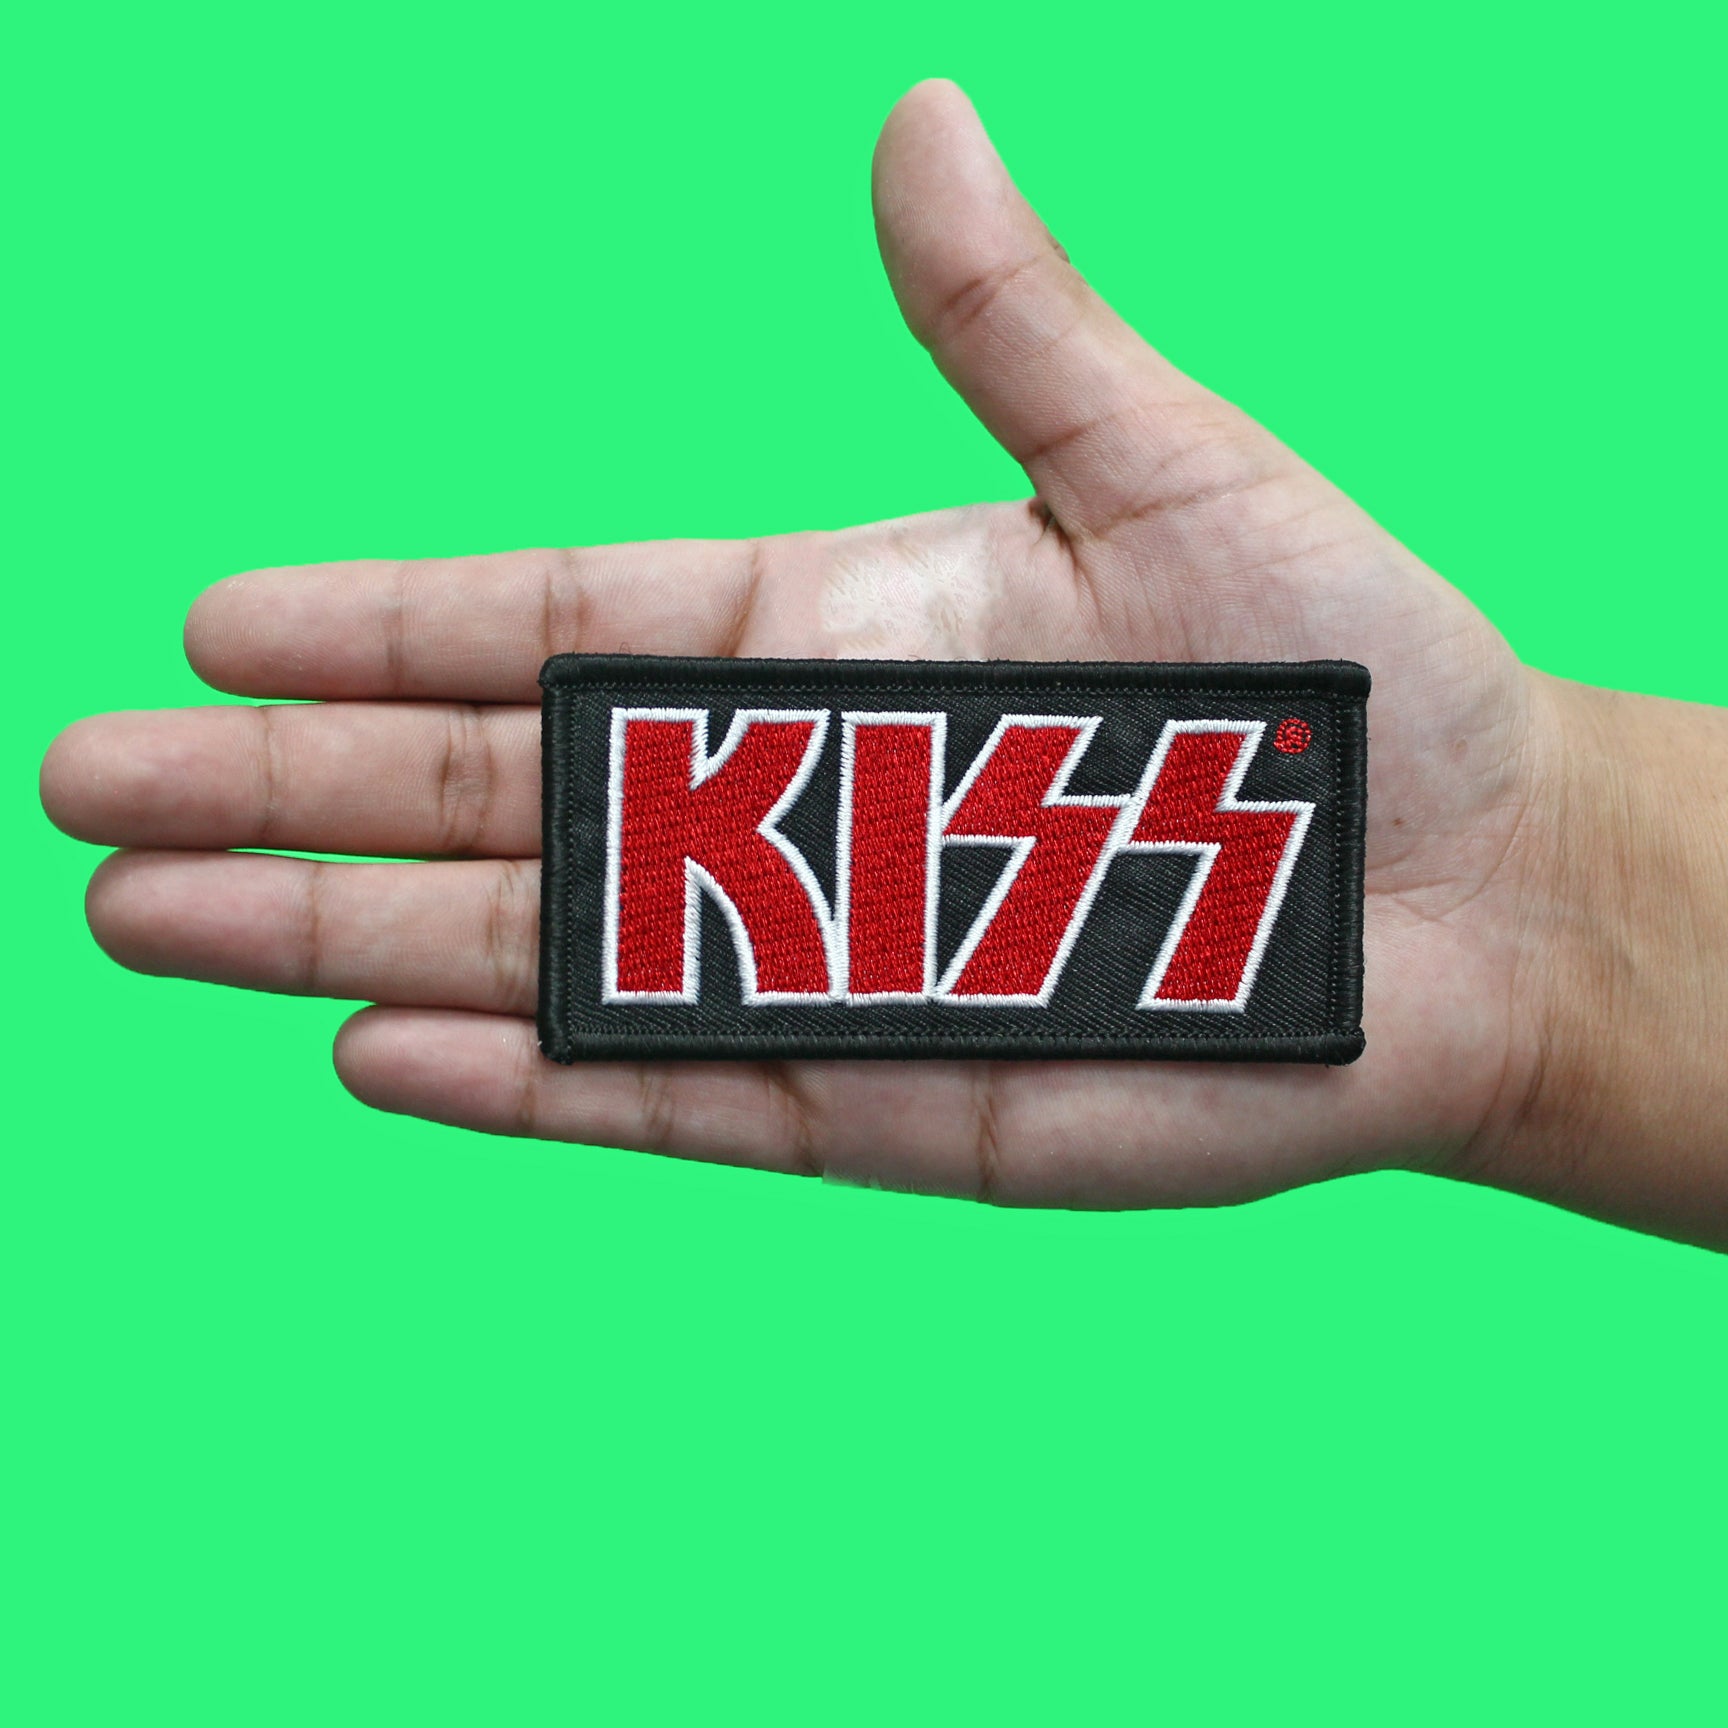 Kiss Classic Red Logo Patch Rock Band Box Embroidered Iron On